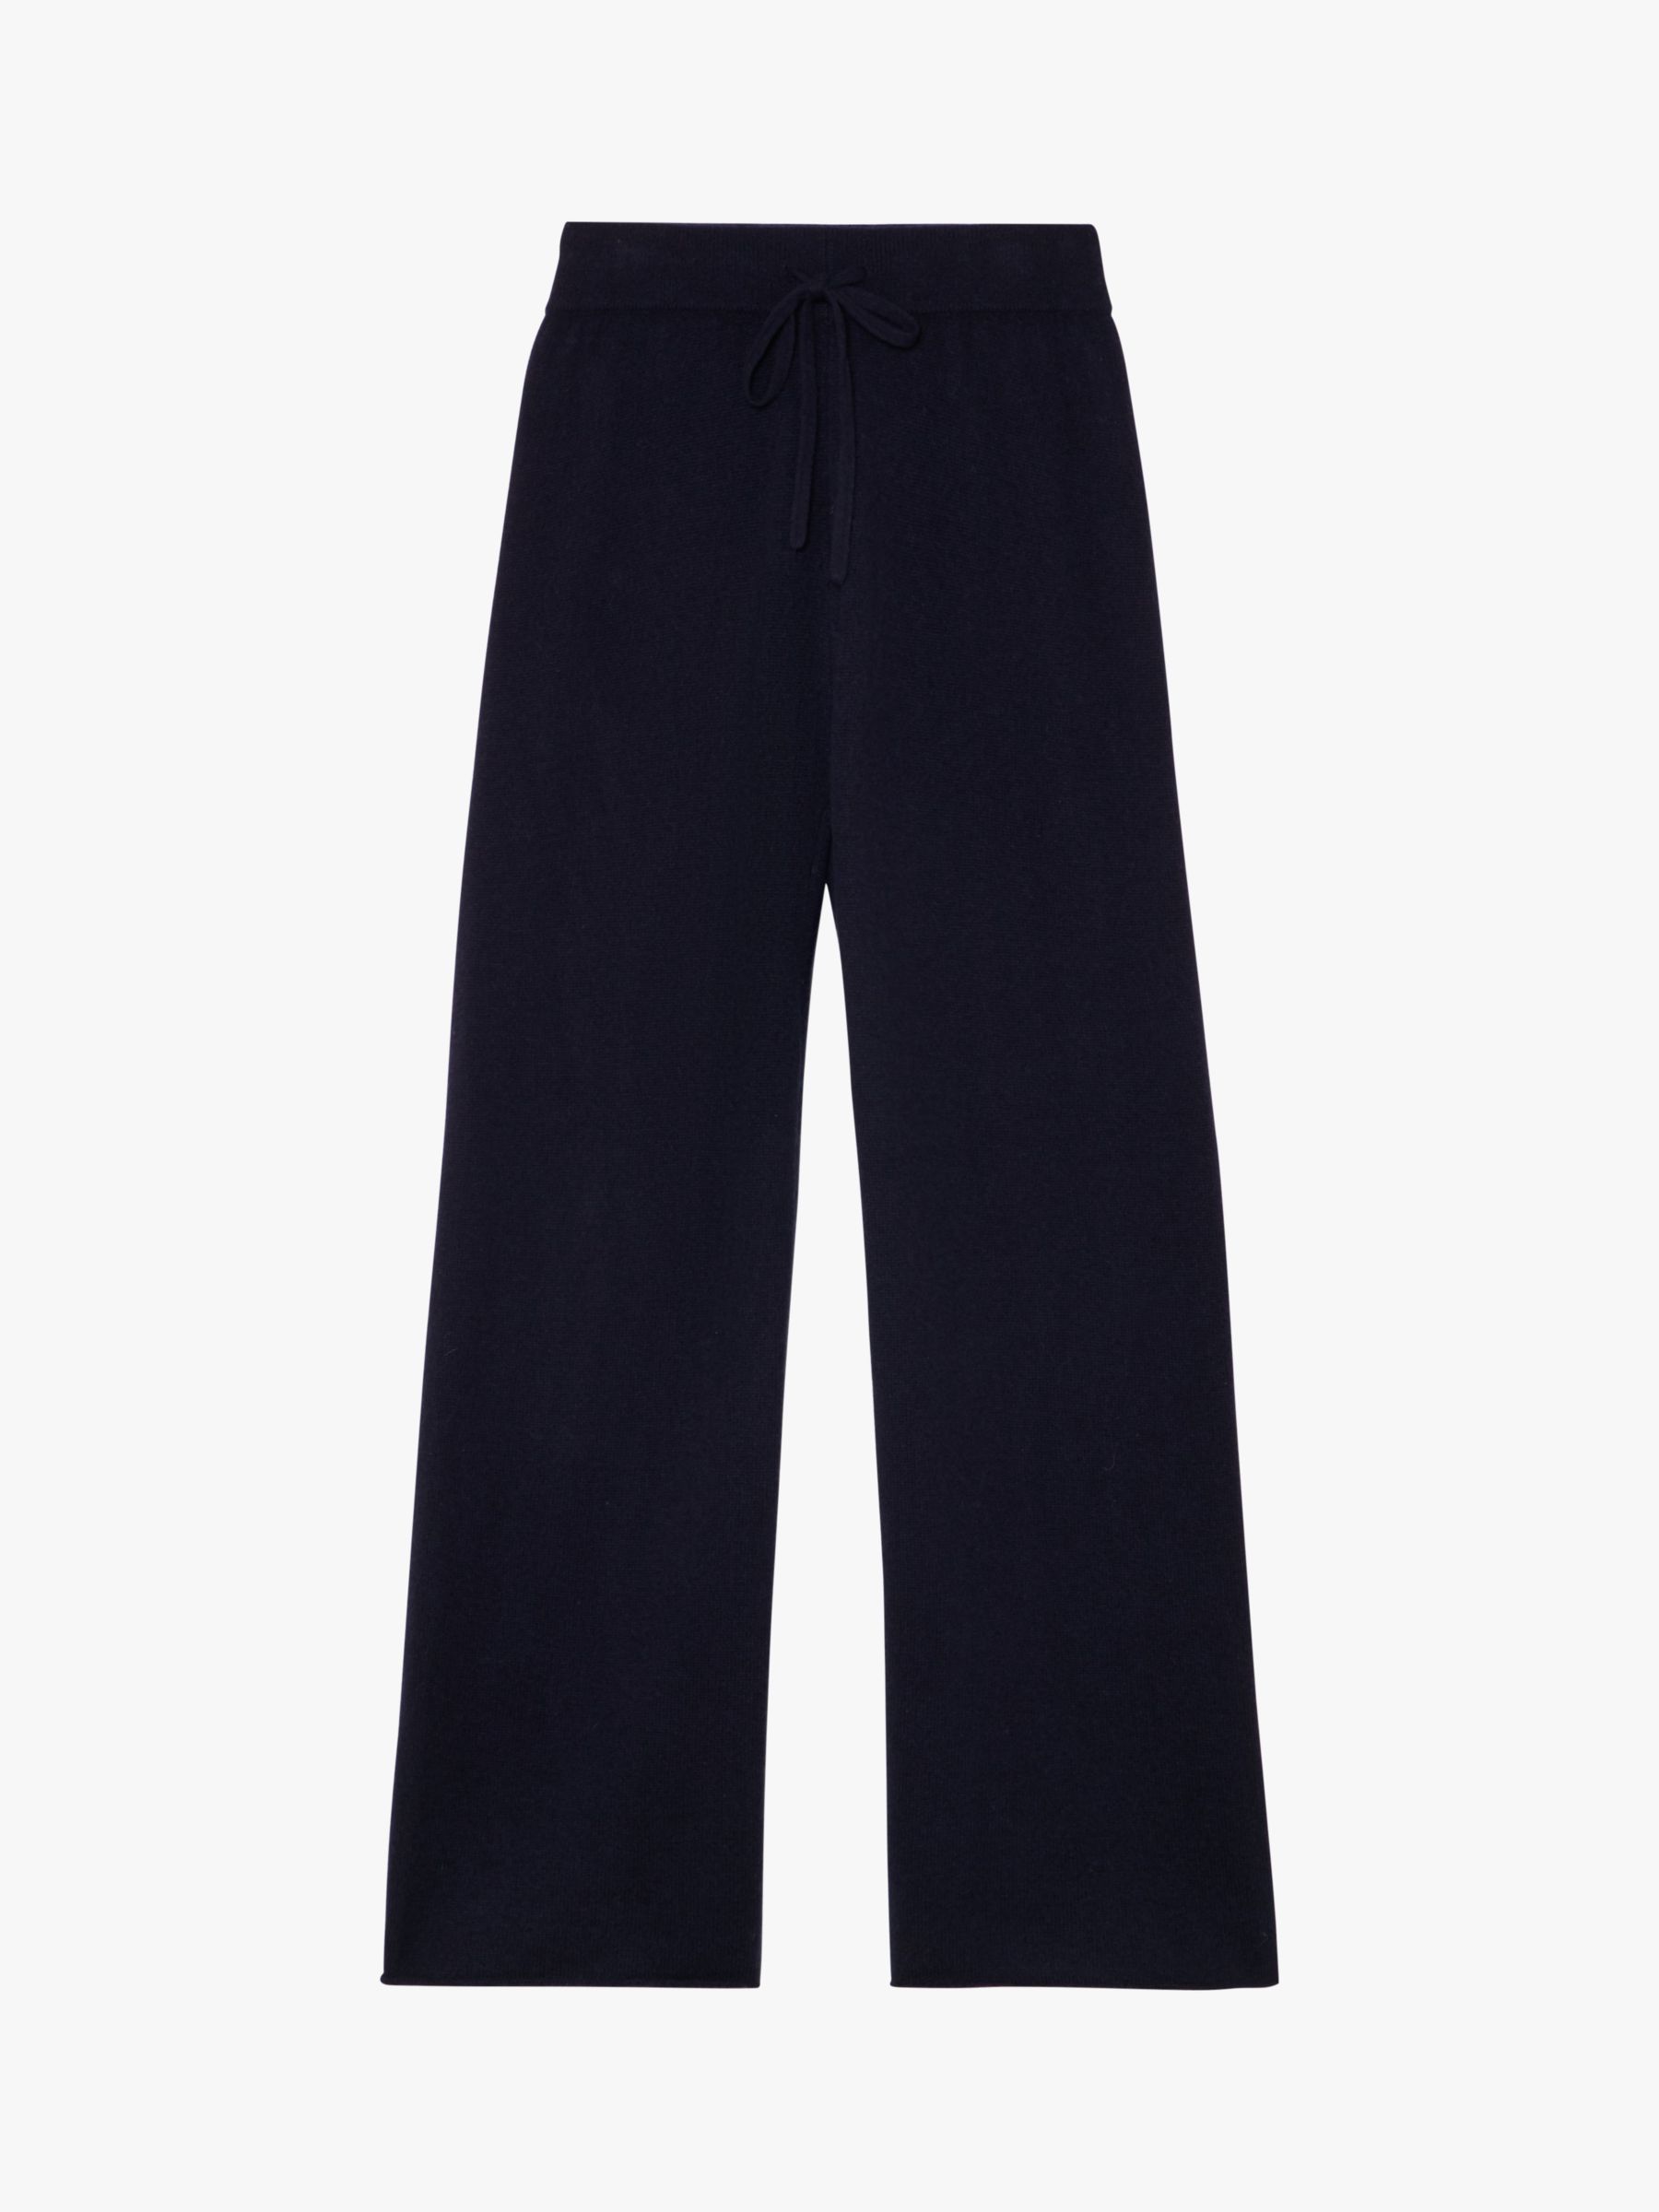 Jigsaw Merino Wool and Cashmere Blend Trousers, Navy